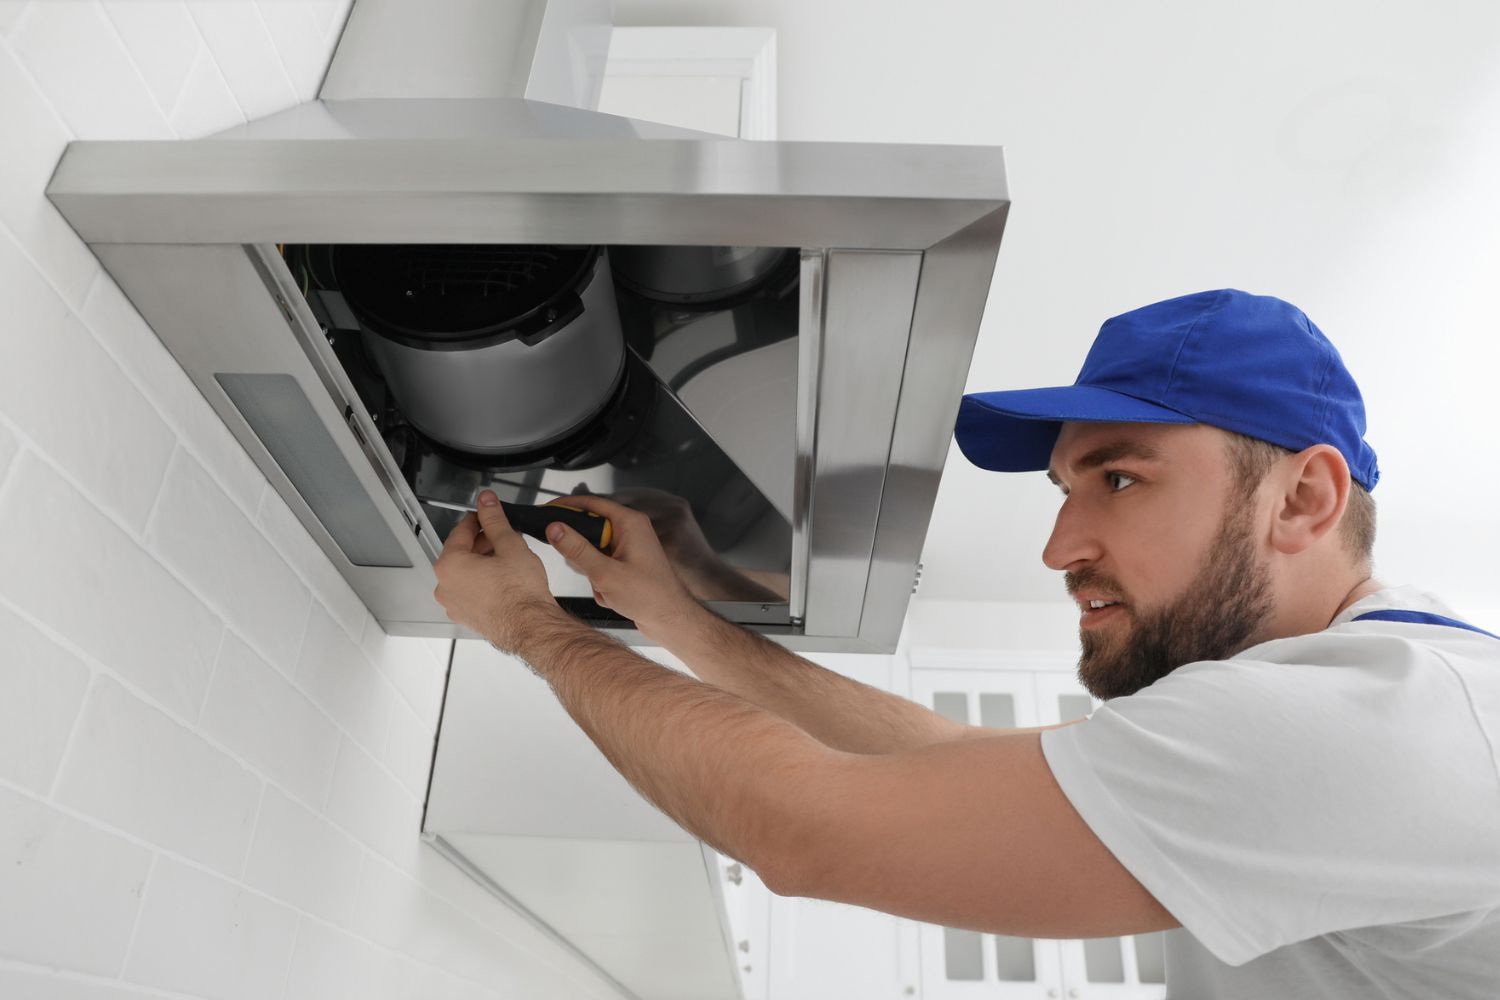 How Much Does Range Hood Installation Cost: Electrician wiring a range hood during a professional installation service